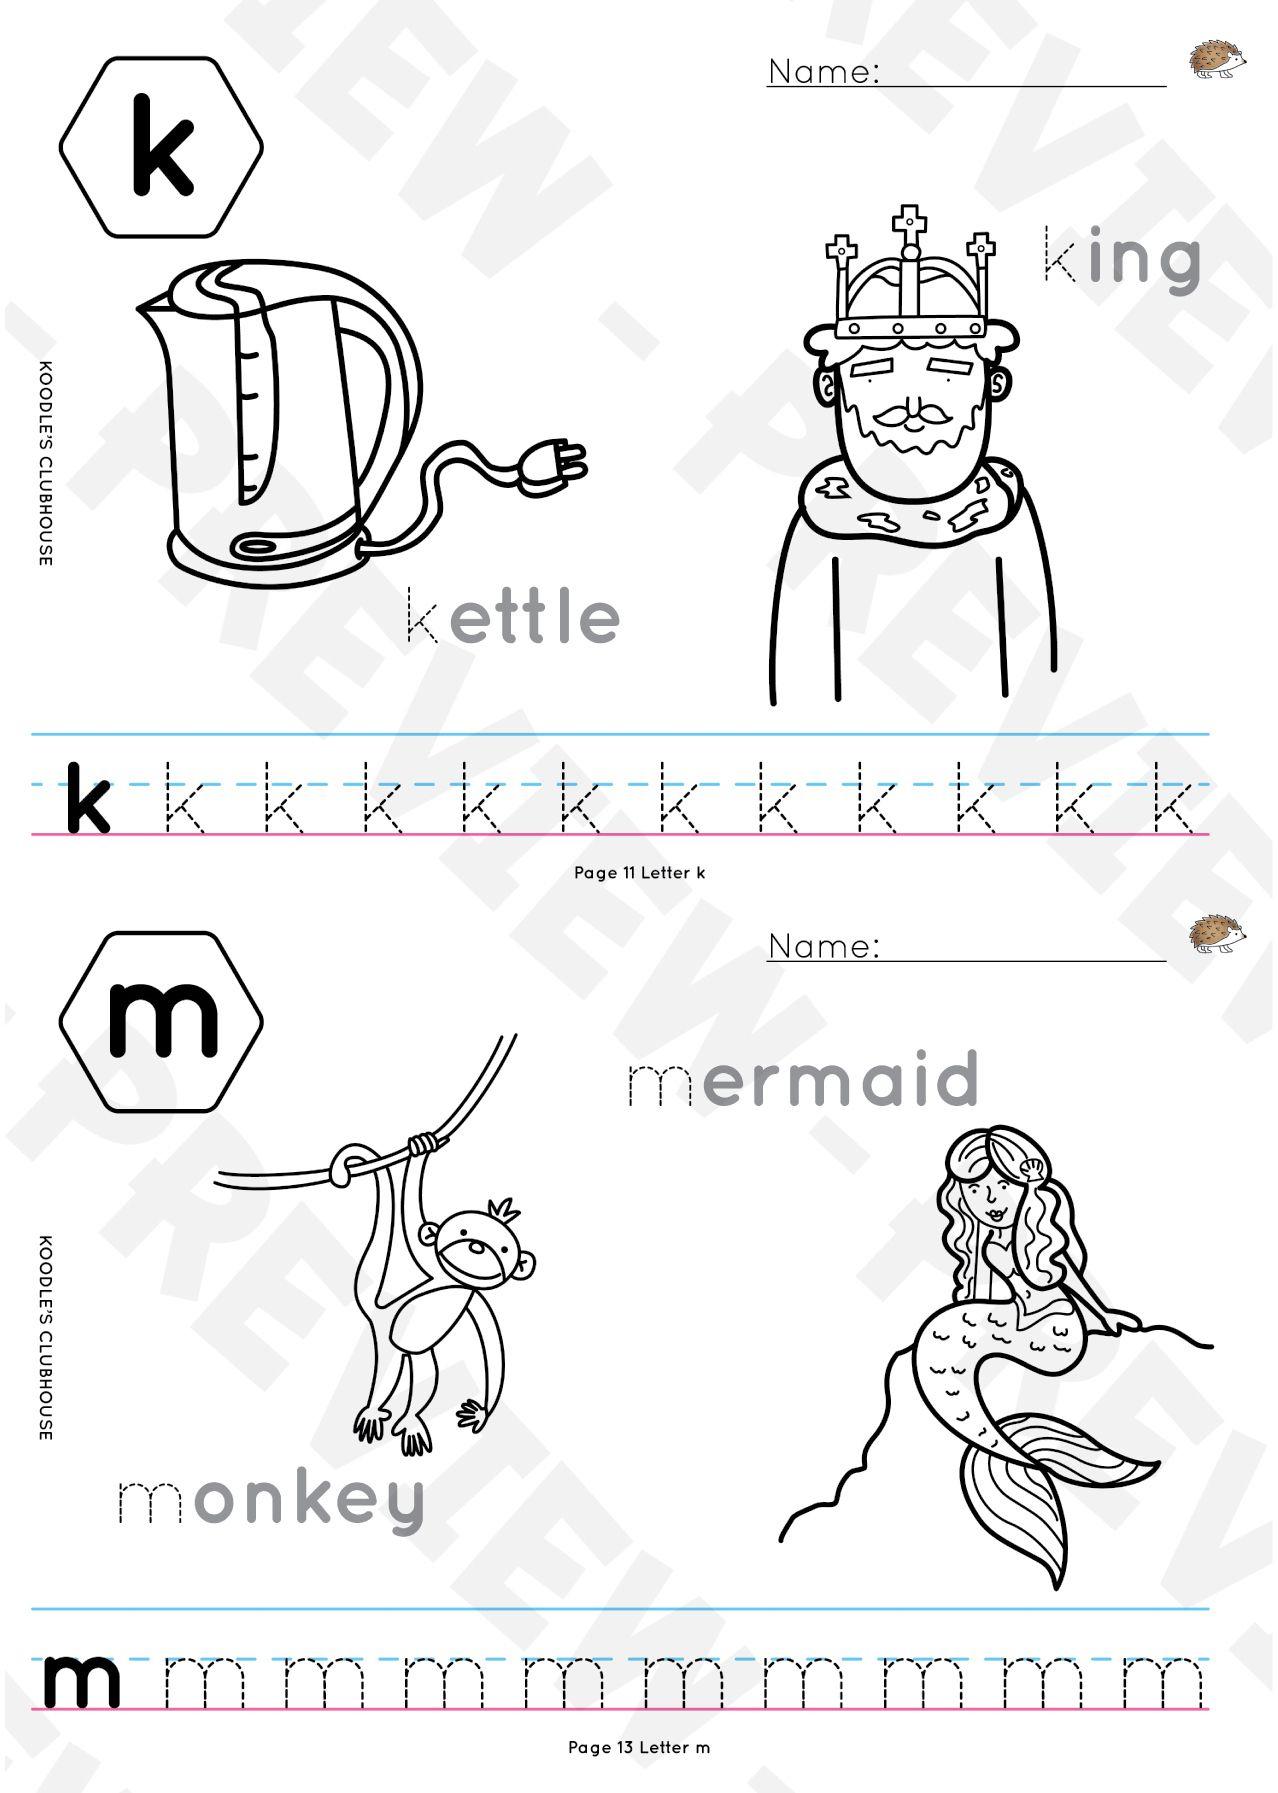 A To Z Tracing Worksheets | Tracing Worksheets, Letter in Name Tracing Outline